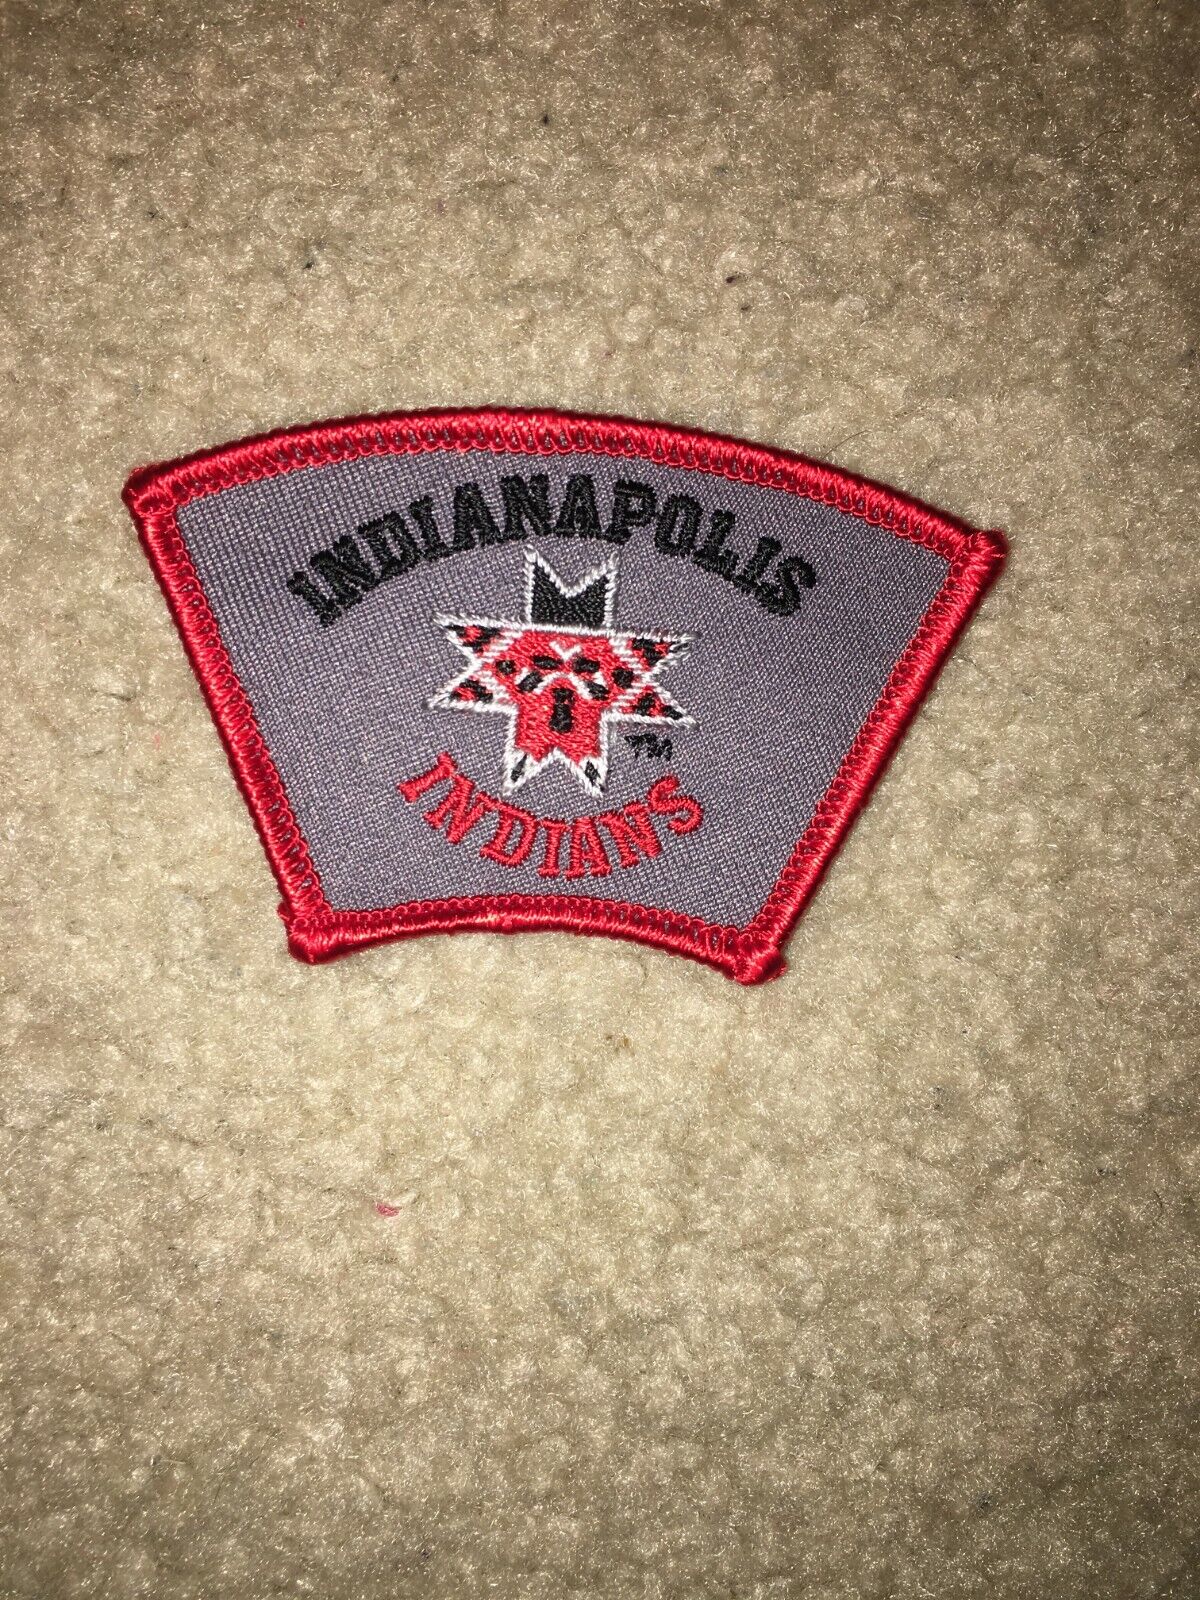 Boy Scout Indianapolis Indians 3 Indiana Crossroads America Council Sport Patch